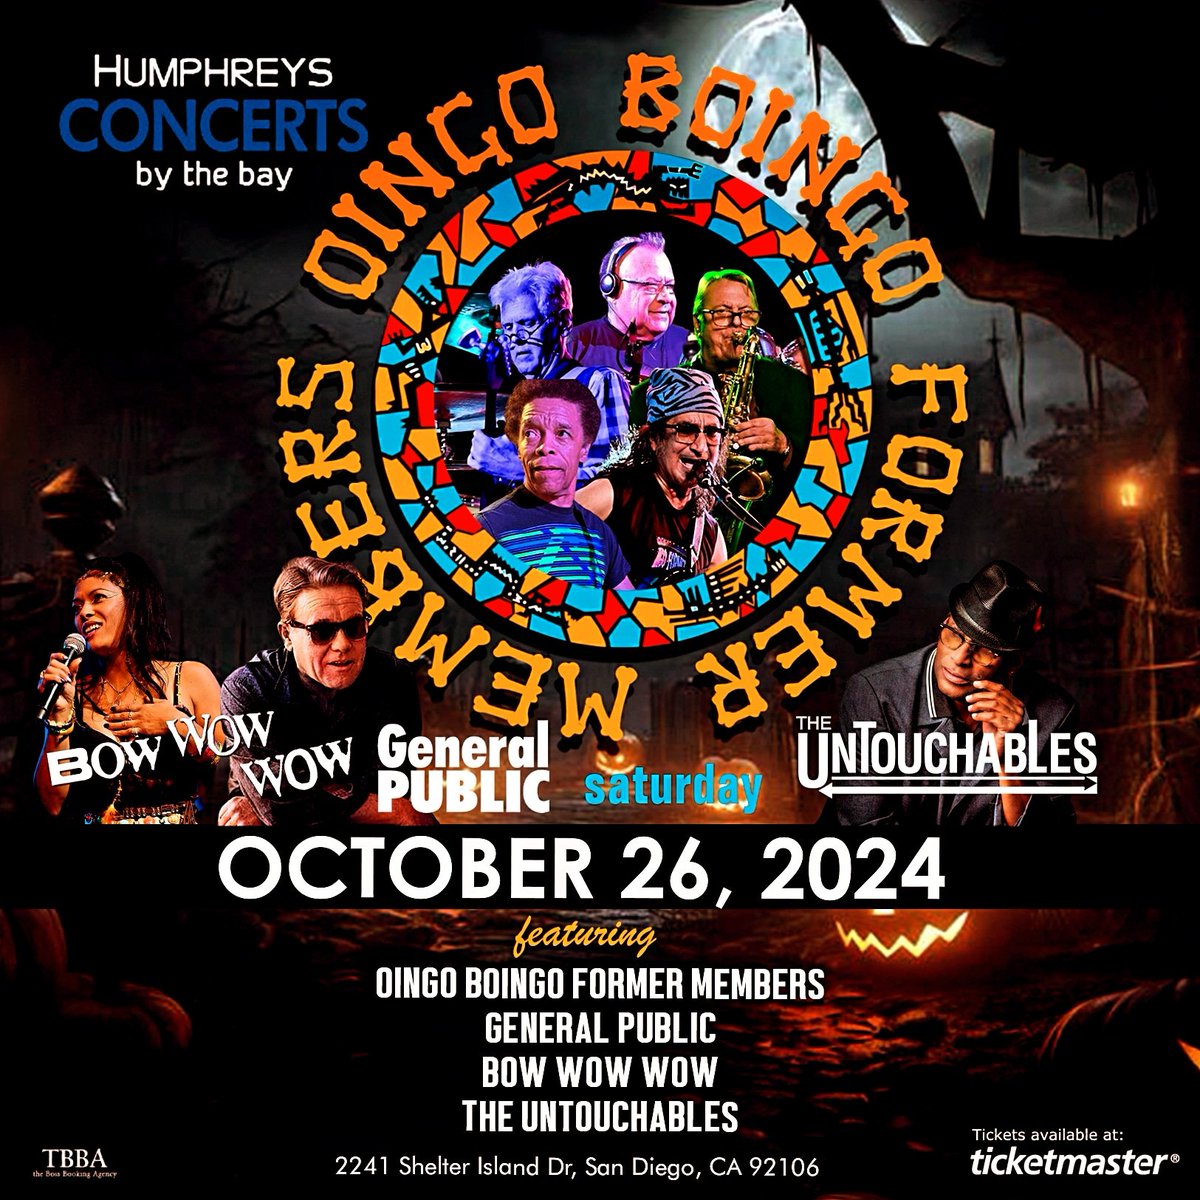 We know you're thinking what we are thinking as Spring is approaching.. Halloween 🎃 is right around the corner, hows about some dancing together in San Diego, CA ? 💀 Saturday, October 26, 2024 @humphreysshows. Tix on sale this Friday 3/16/24 @dave_wakeling